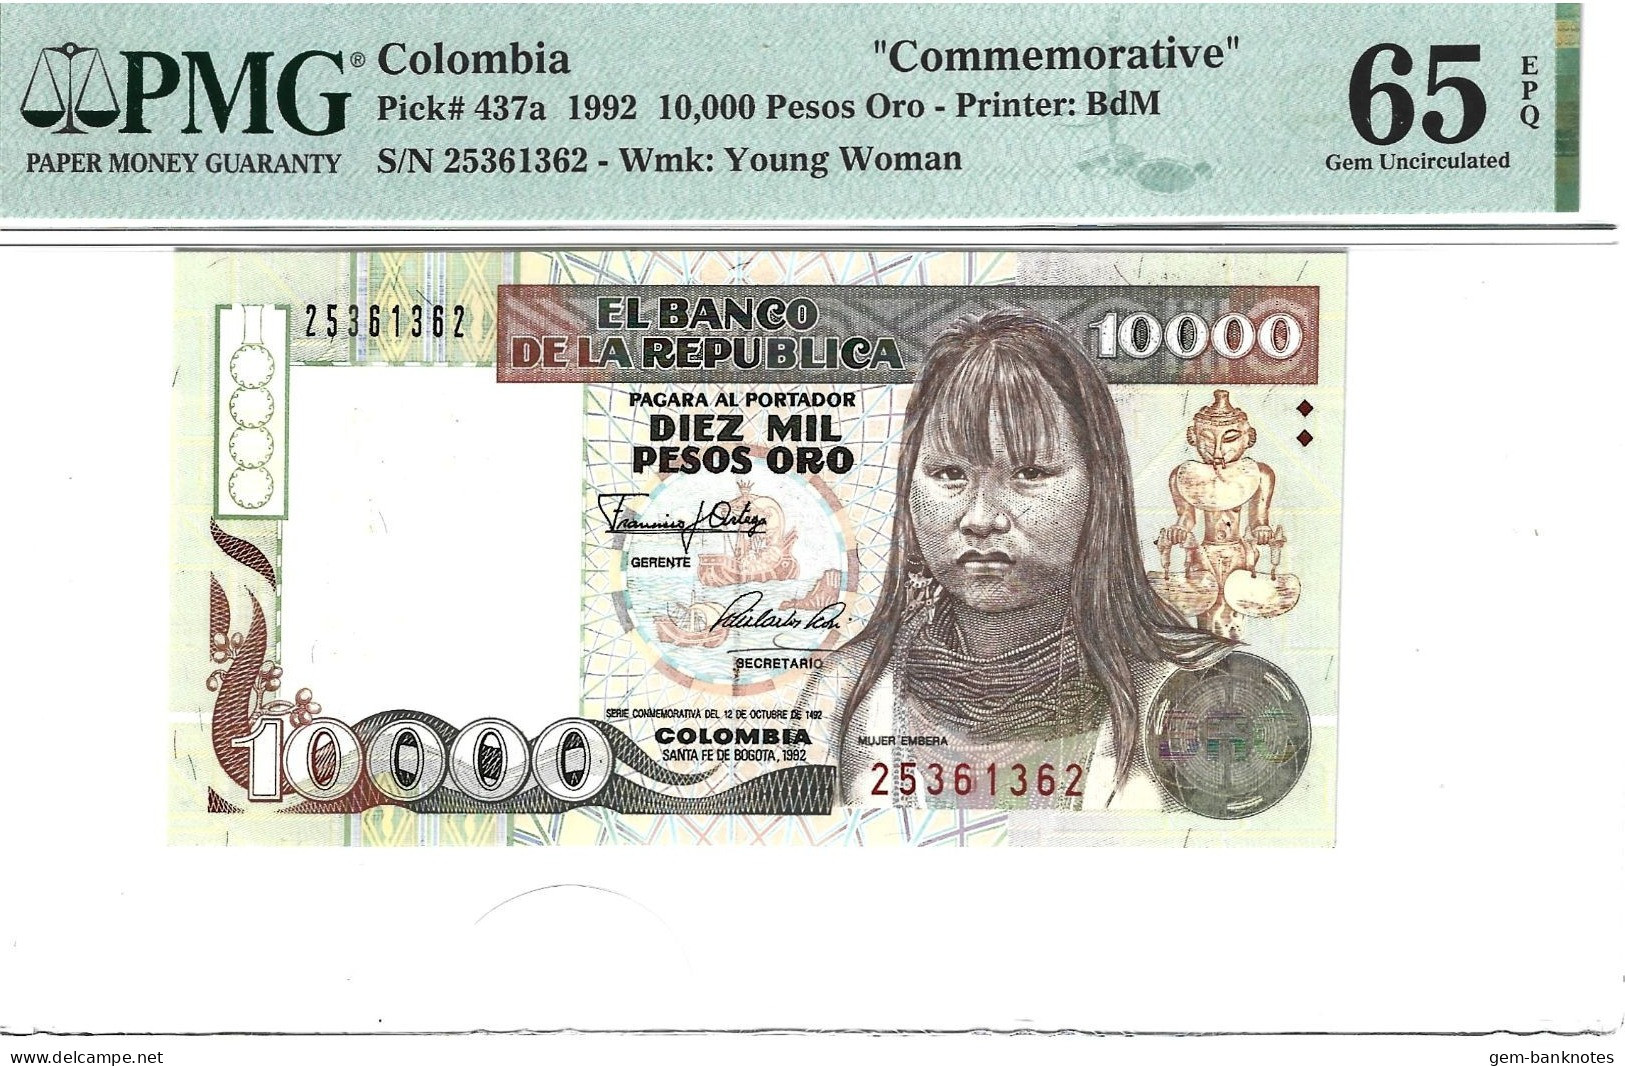 Colombia 10000 Pesos 1992 P437a Commemorative Graded 65 EPQ Gem Uncirculated By PMG - Kolumbien